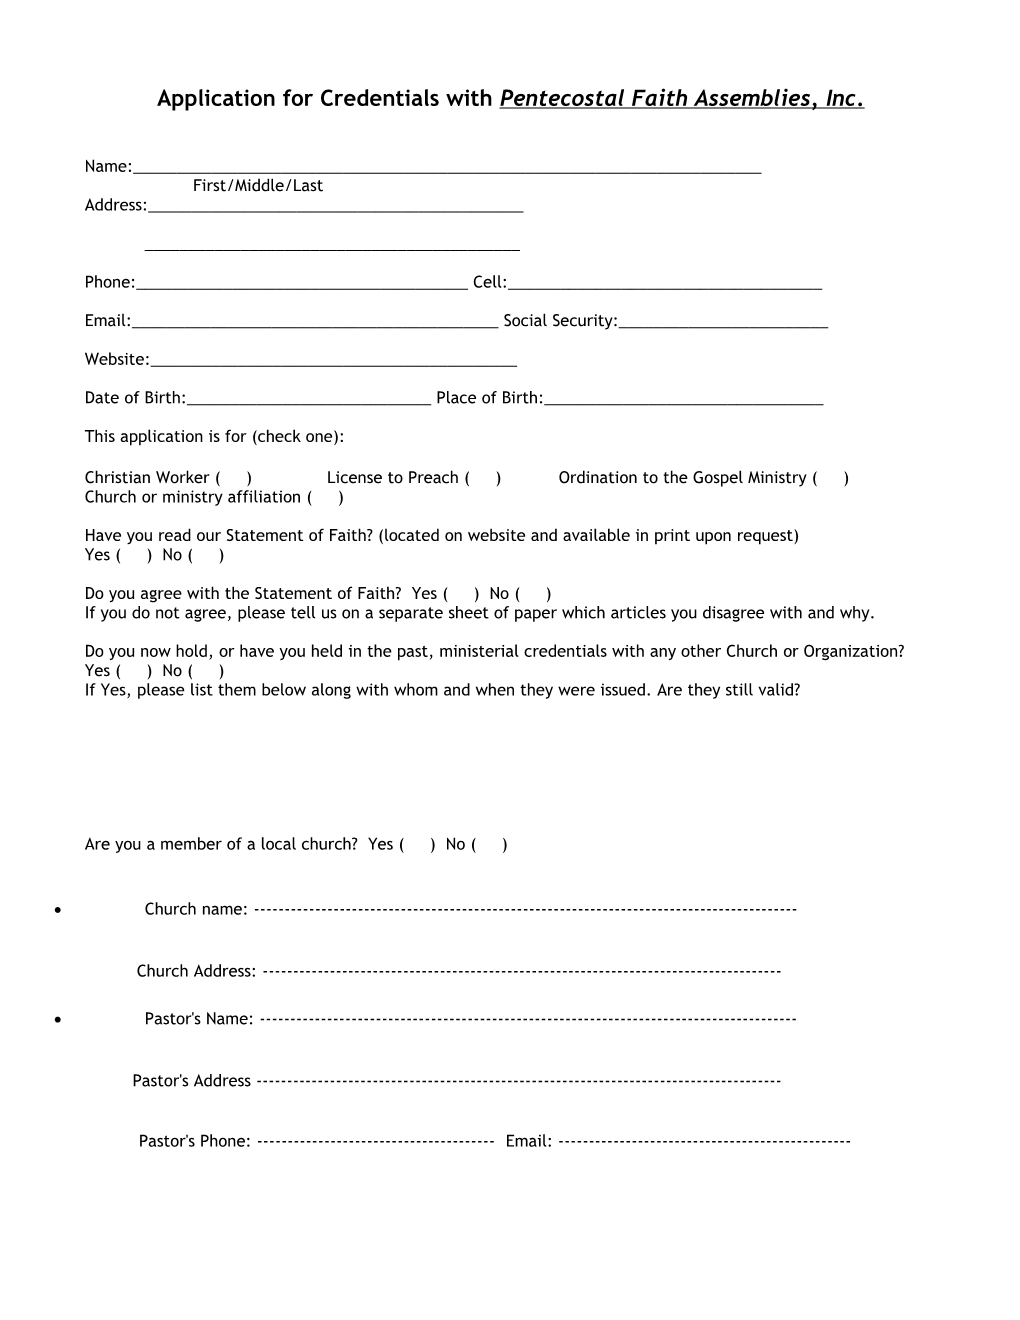 Application For Credentials With Pentecostal Faith Assemblies, Inc